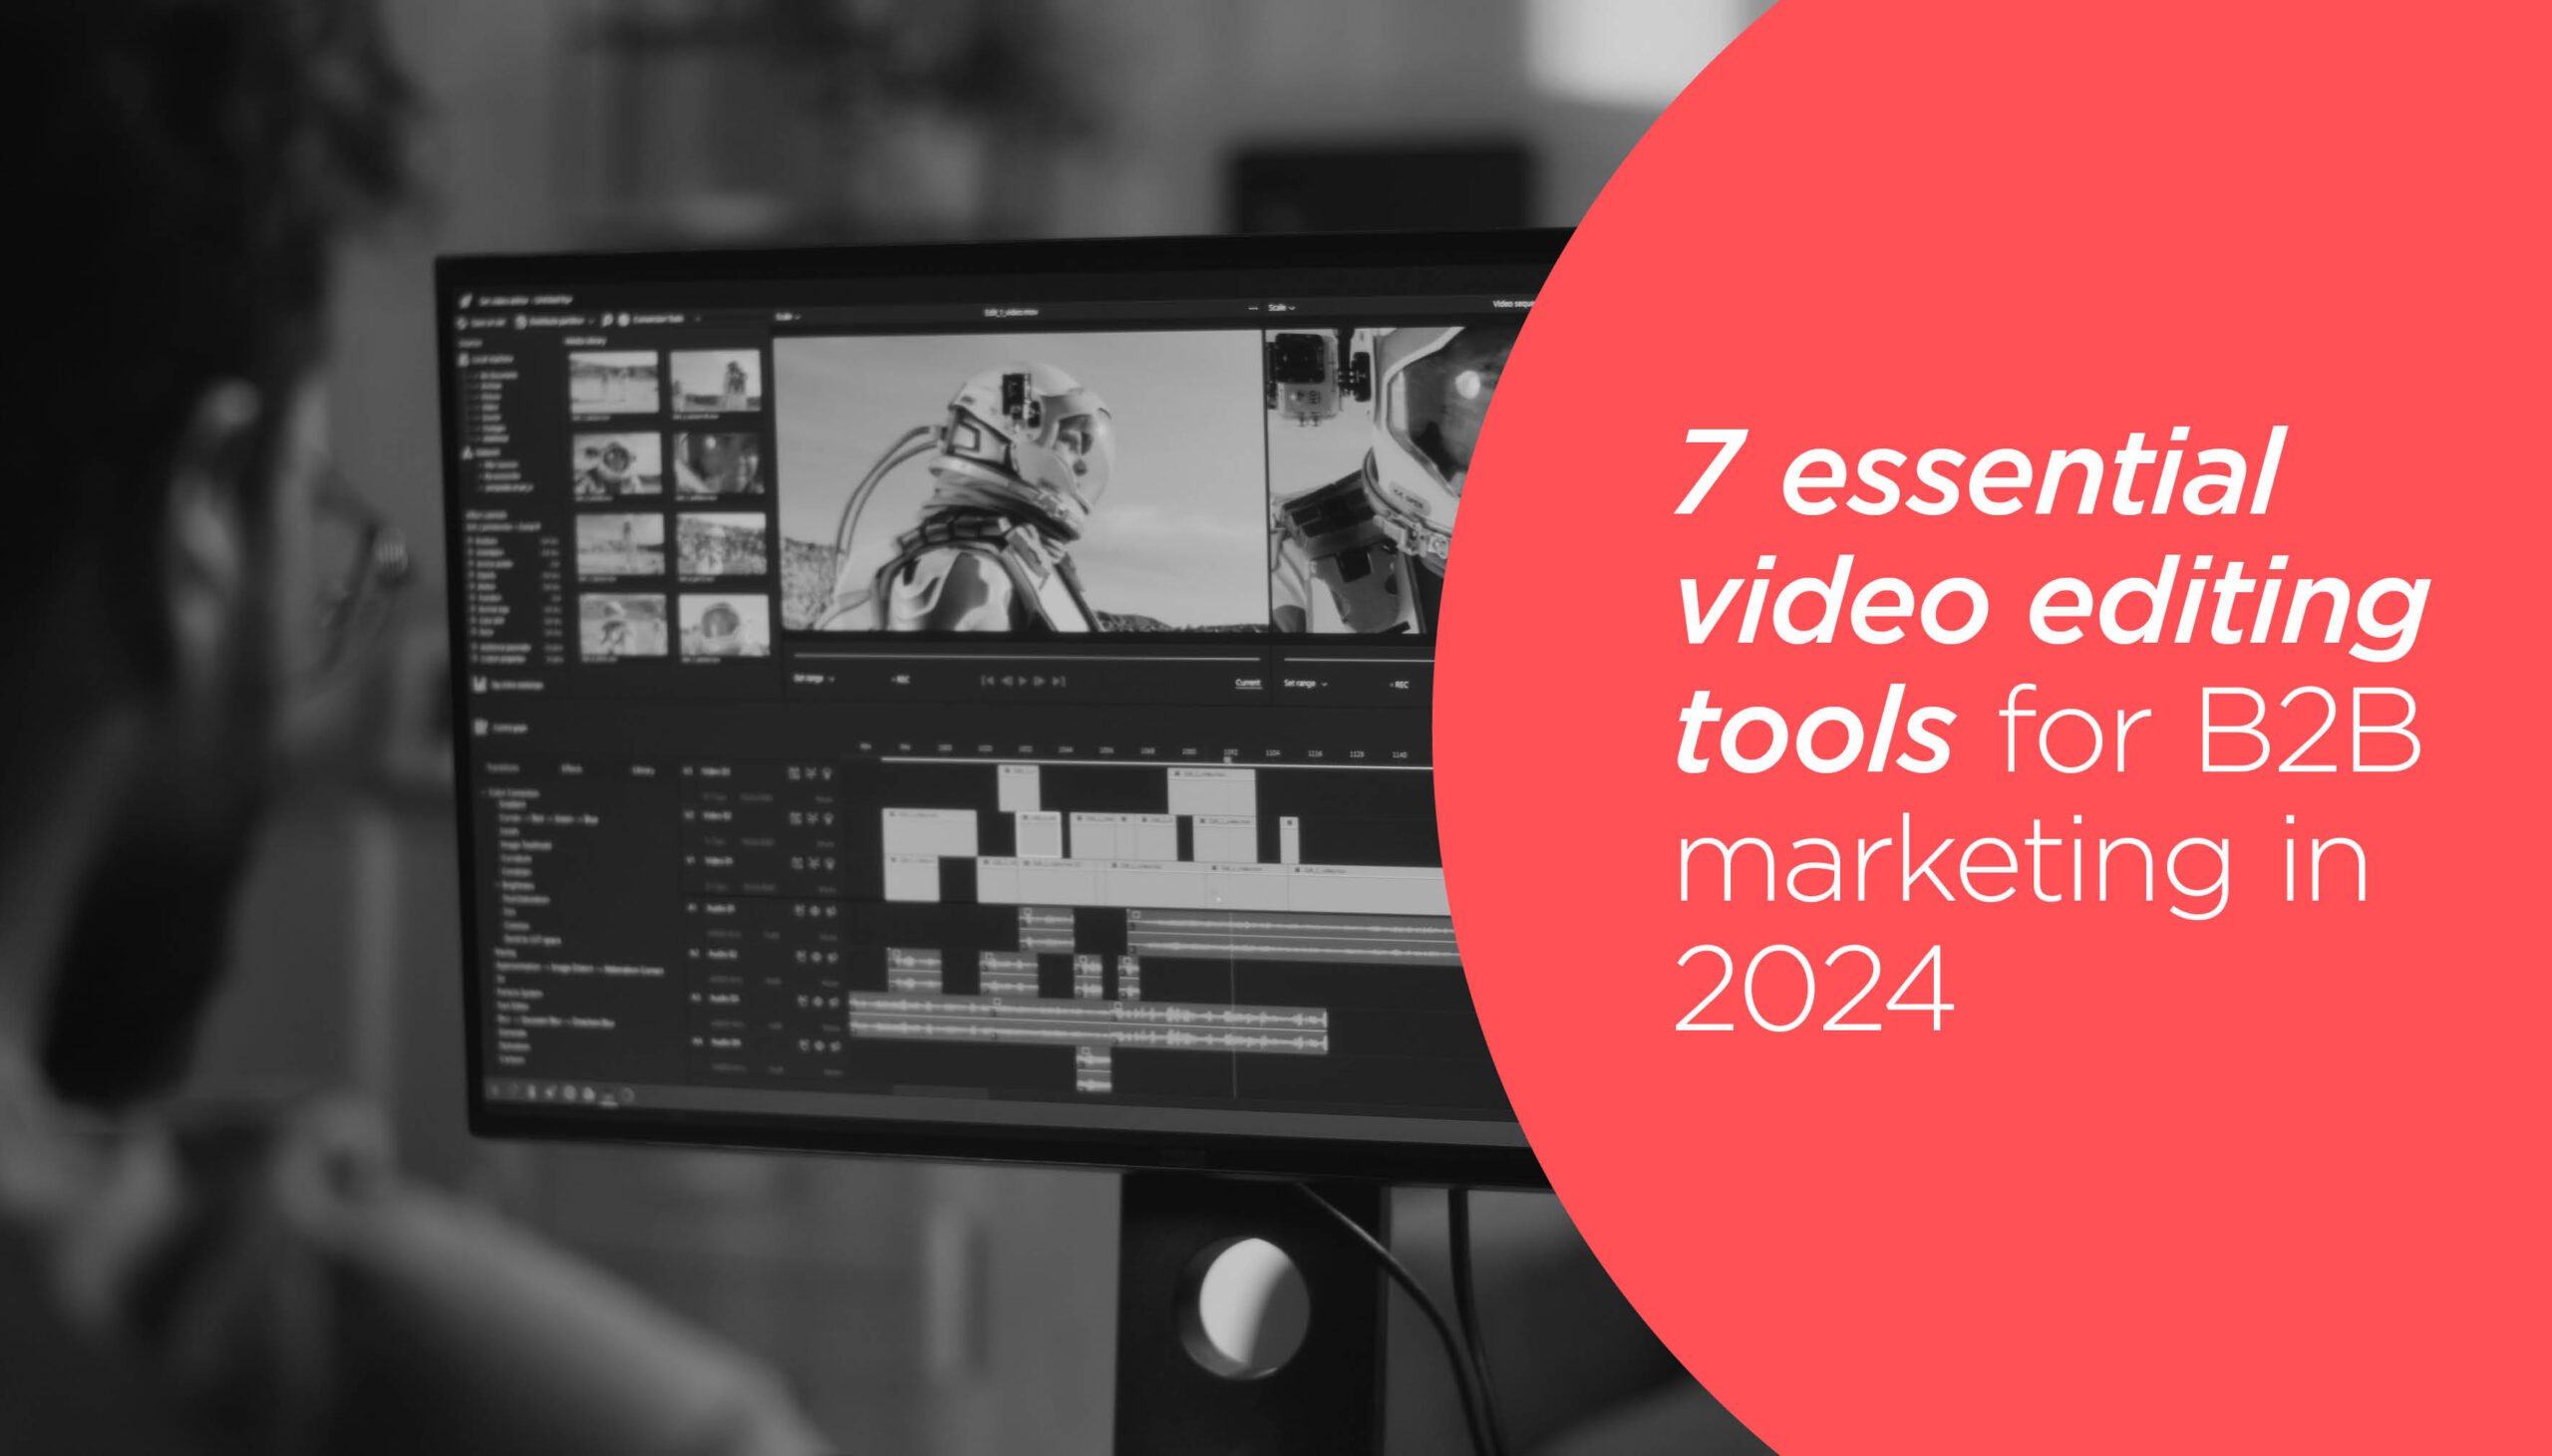 7 Essential Video Editing Tools for B2B Marketing in 2024